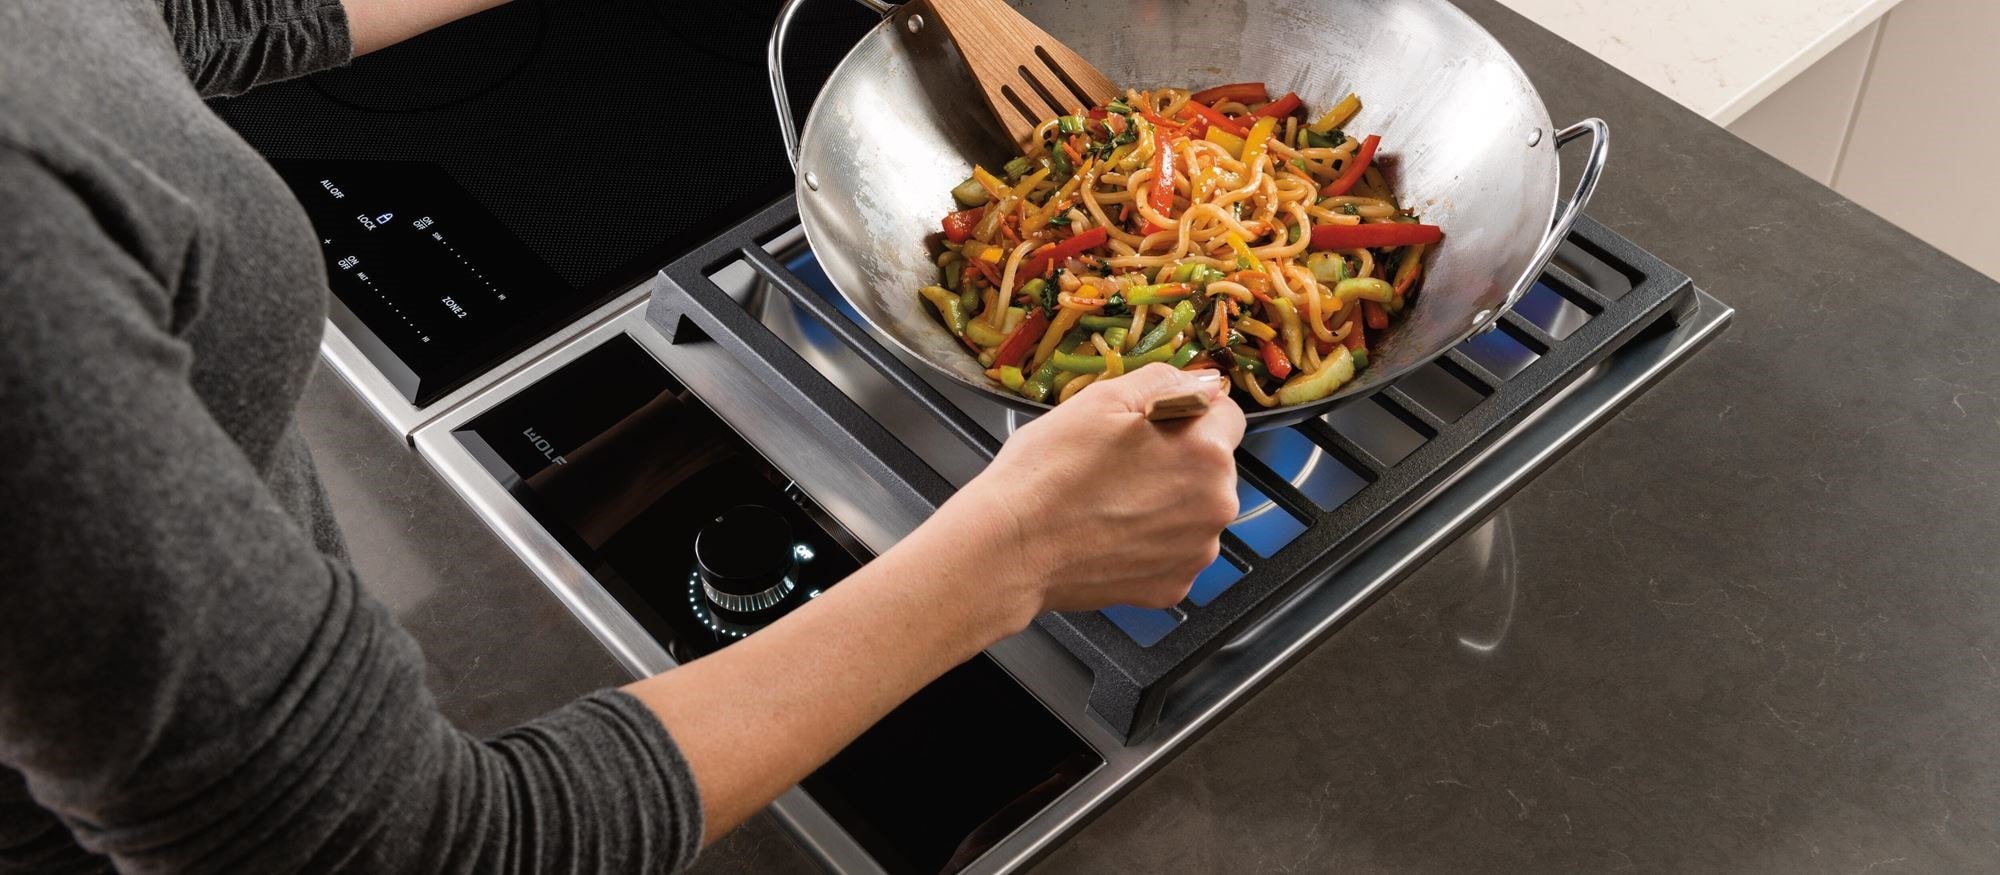 Wolf 30 Transitional Gas Cooktop - 4 Burners (CG304T/S)